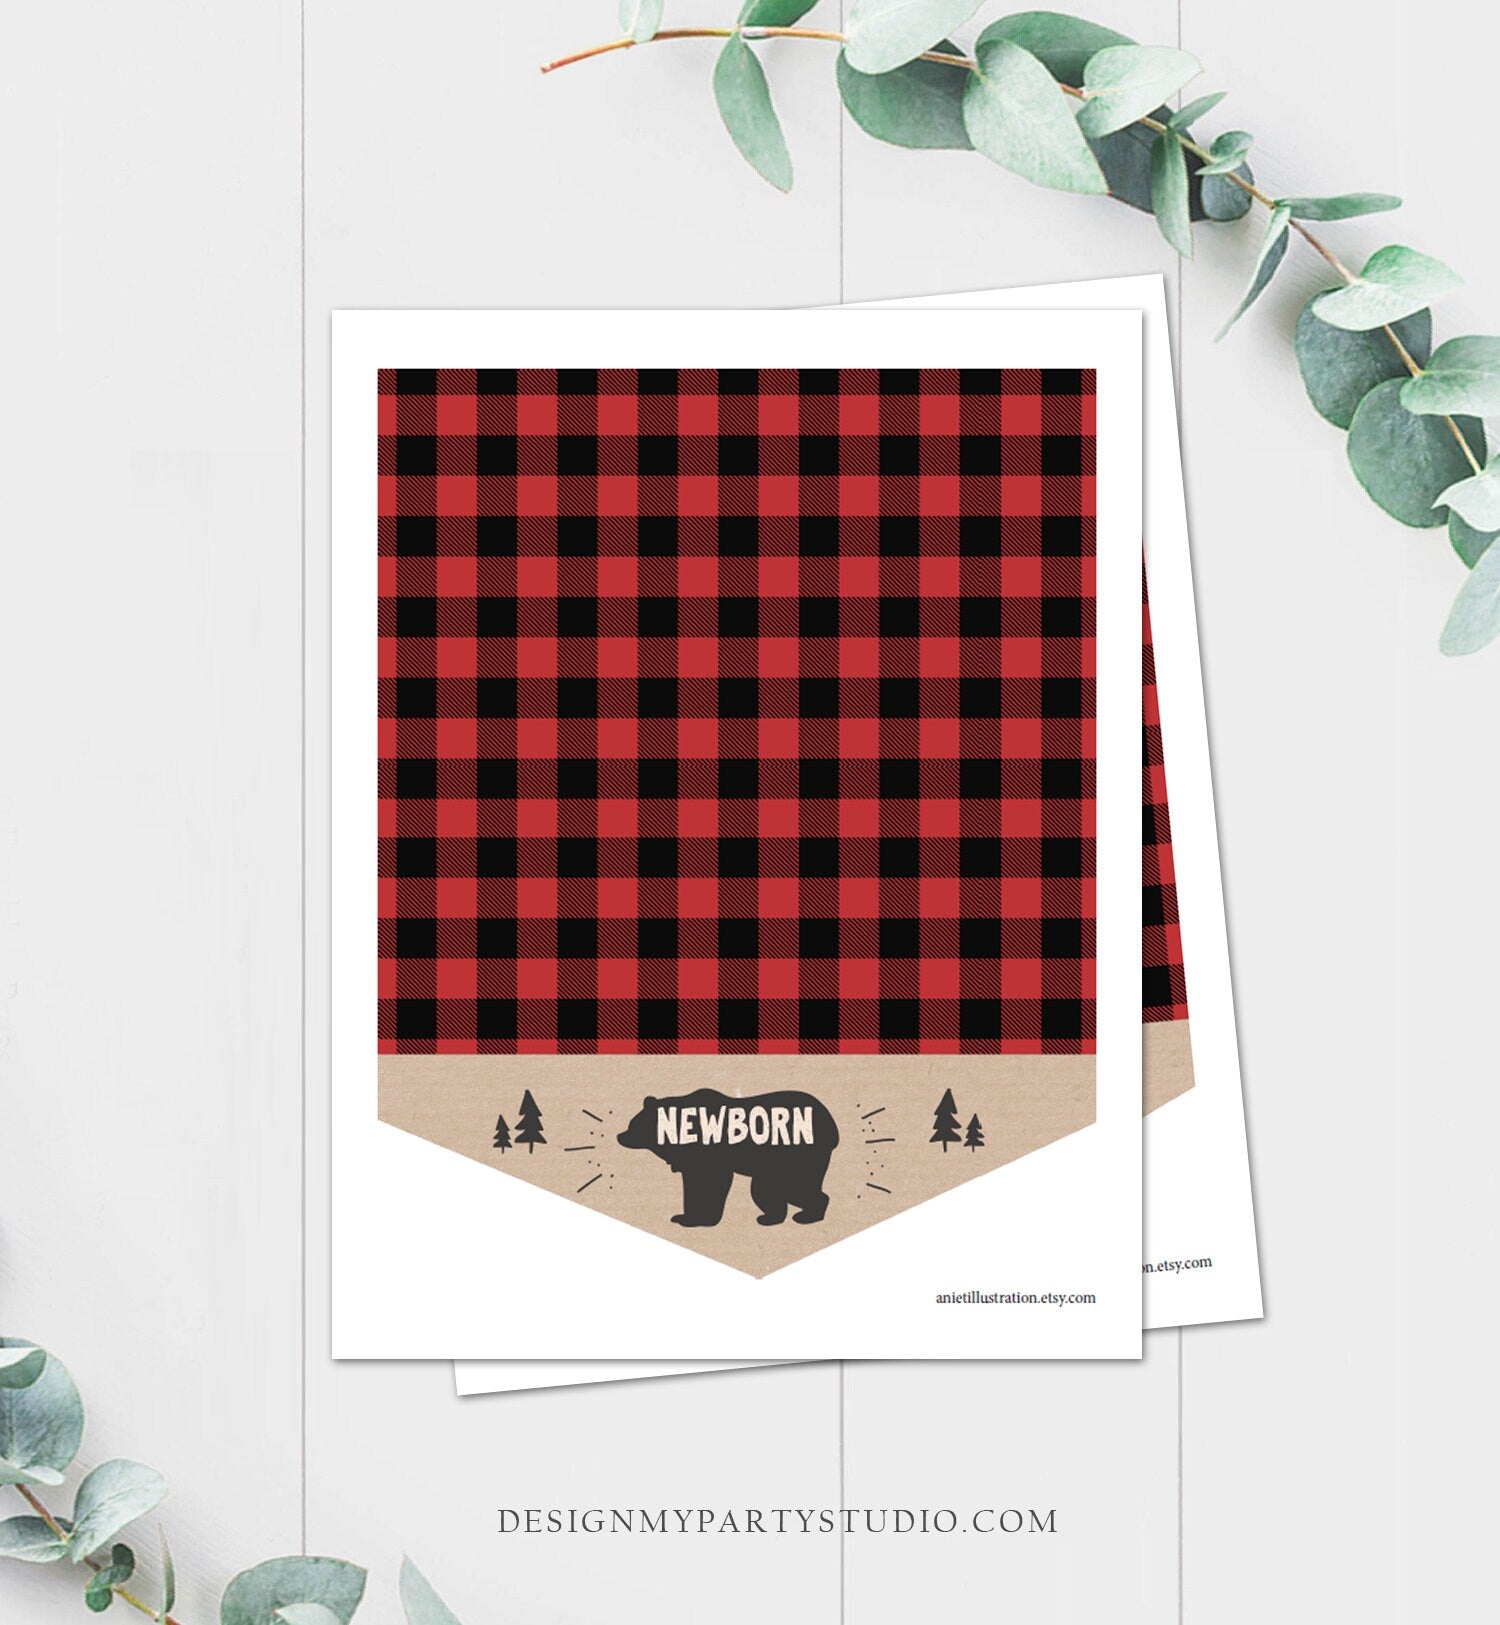 Lumberjack First Birthday Banner Monthly Photo Banner Buffalo Plaid Party Decor Instant Download Printable DIY Digital 0026